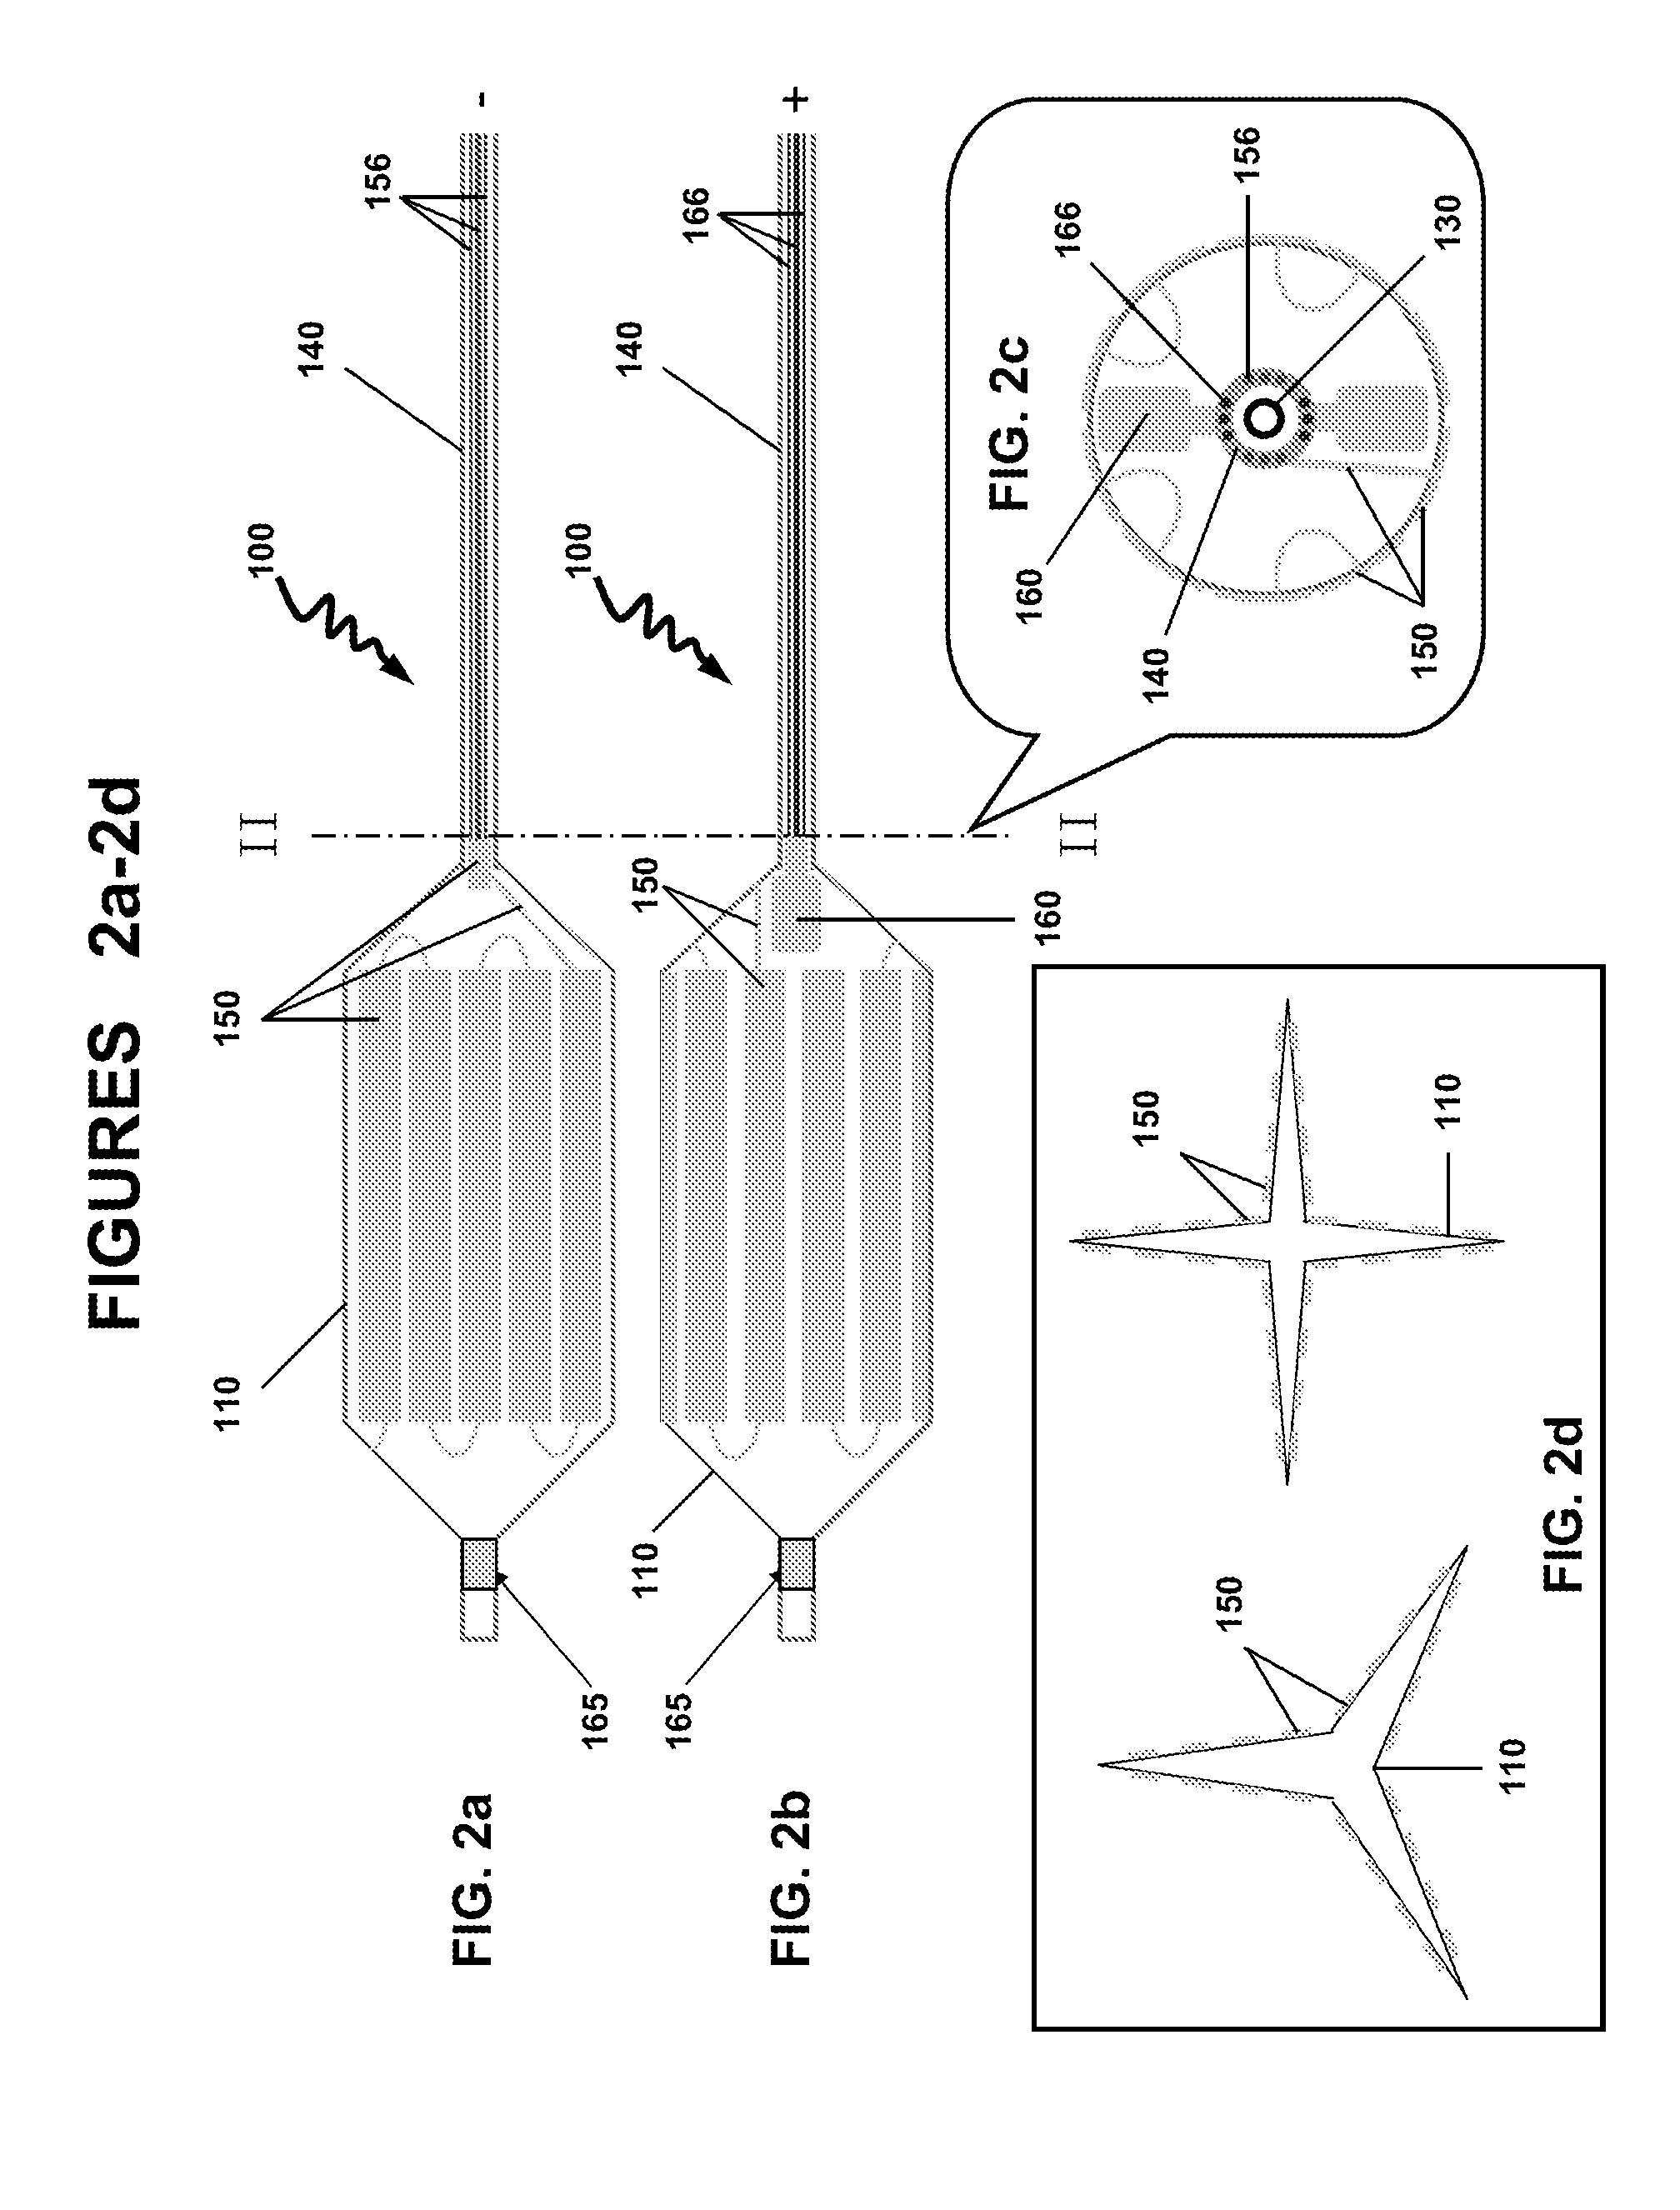 Device for local intraluminal transport of a biologically and physiologically active agent